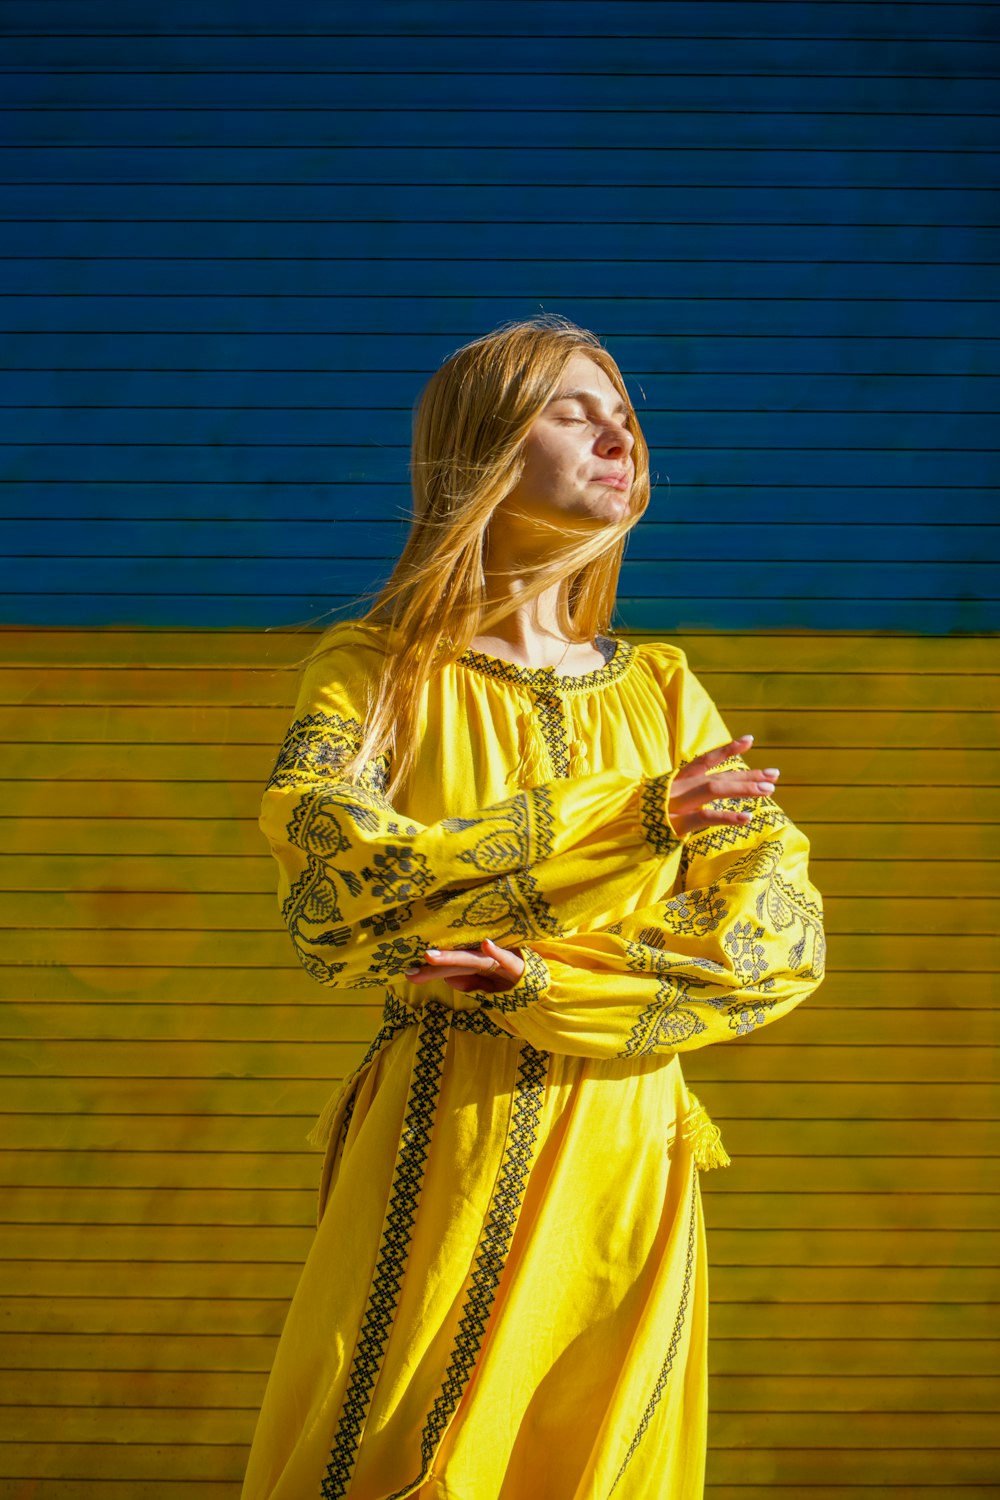 a woman in a yellow dress standing in front of a yellow wall